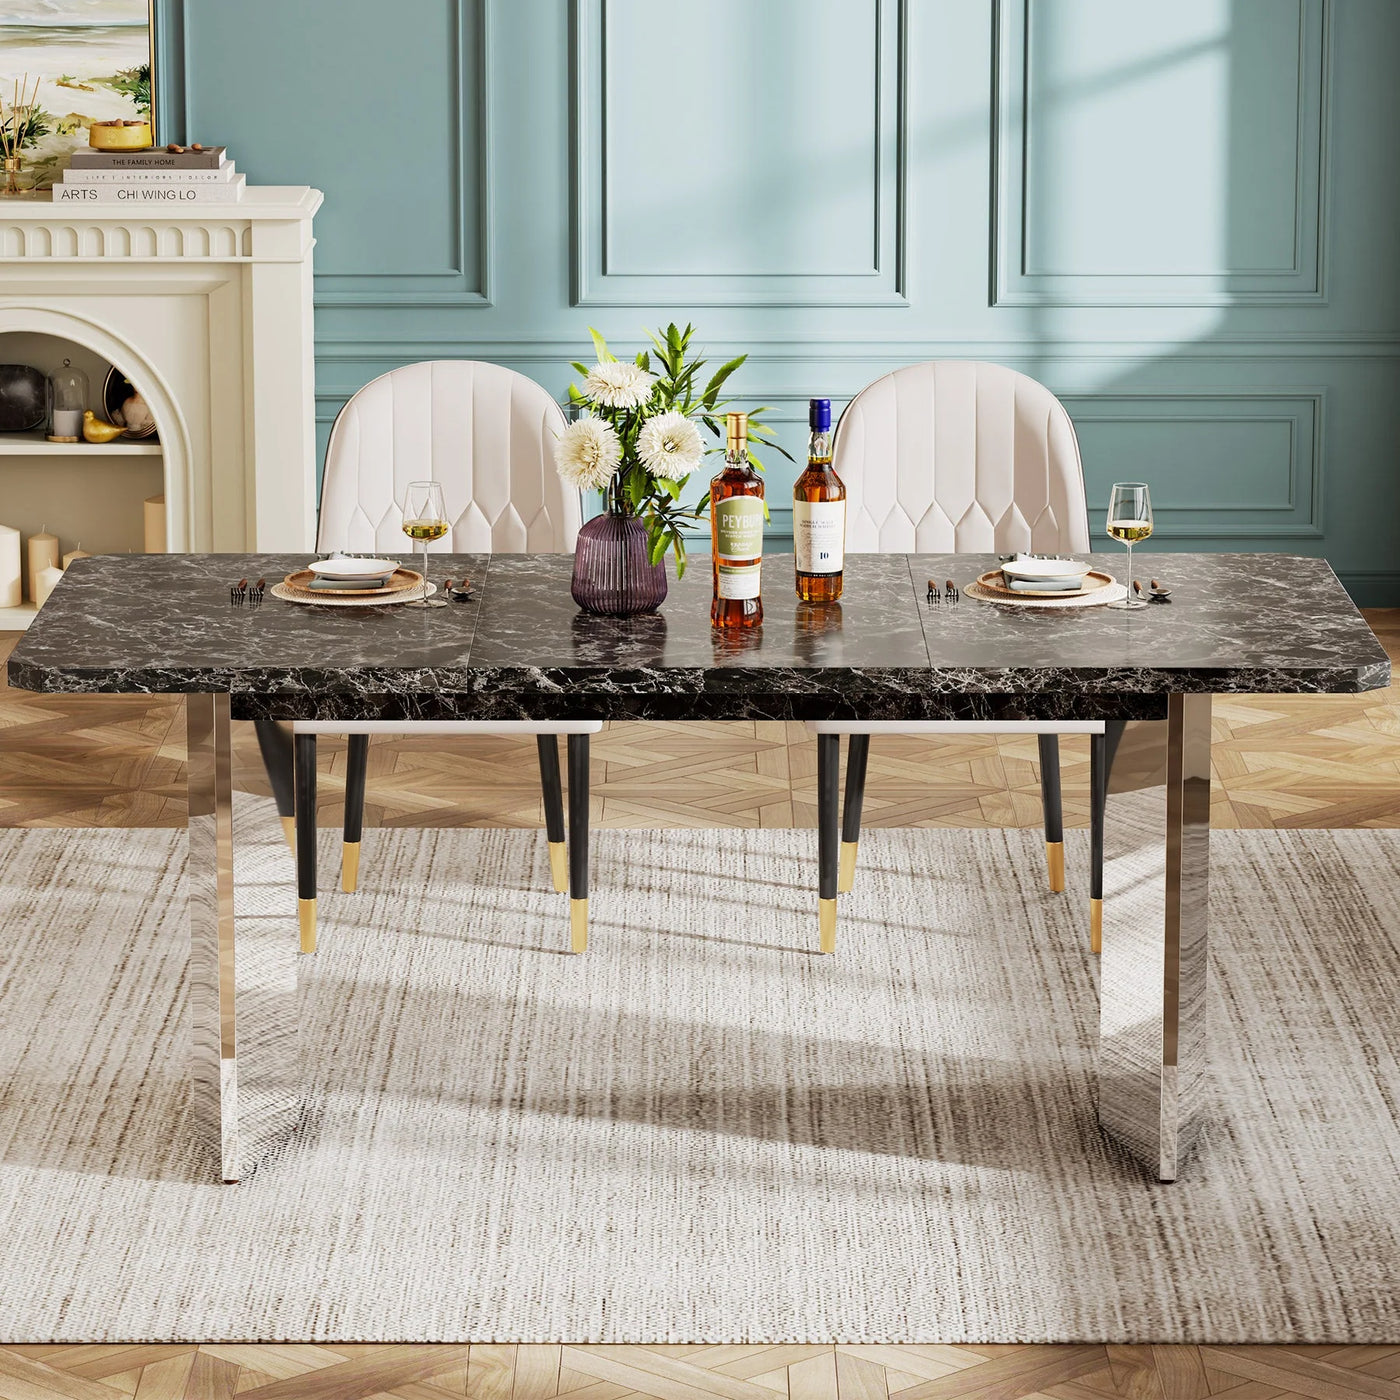 Lucas 62 Inch Dining Table | Modern Luxurious Black Marble Kitchen Table for 4-6